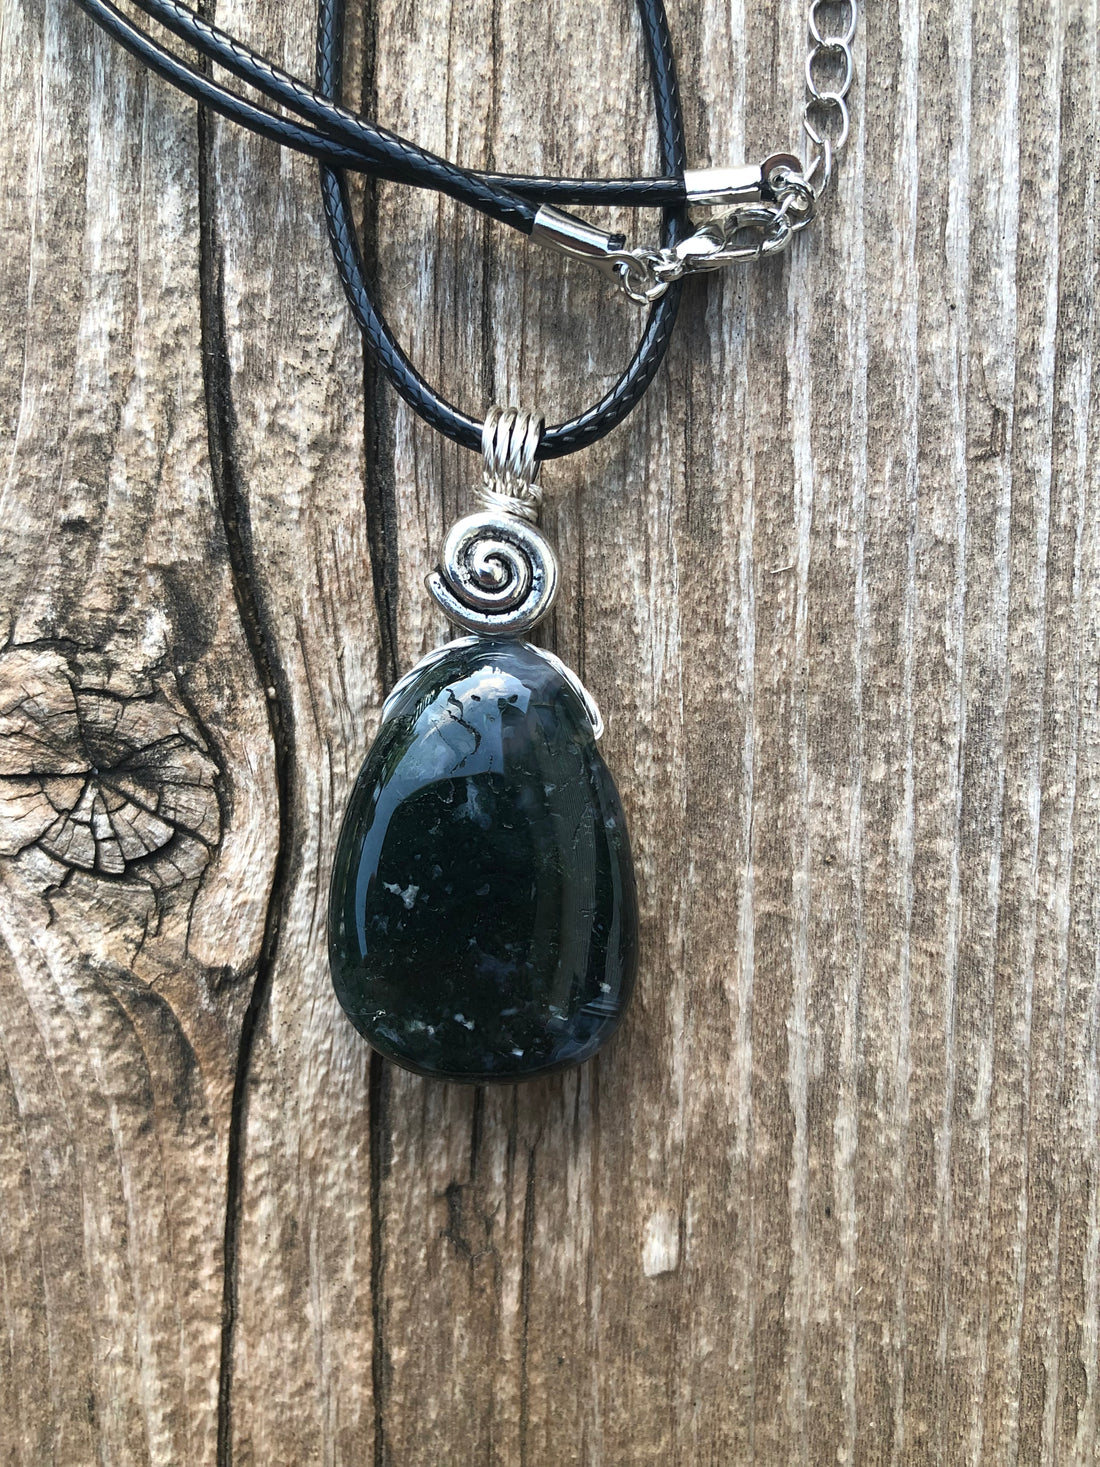 Moss Agate Pendant for Attracting Abundance and Bringing Appreciation. Swirl Signifies Consciousness